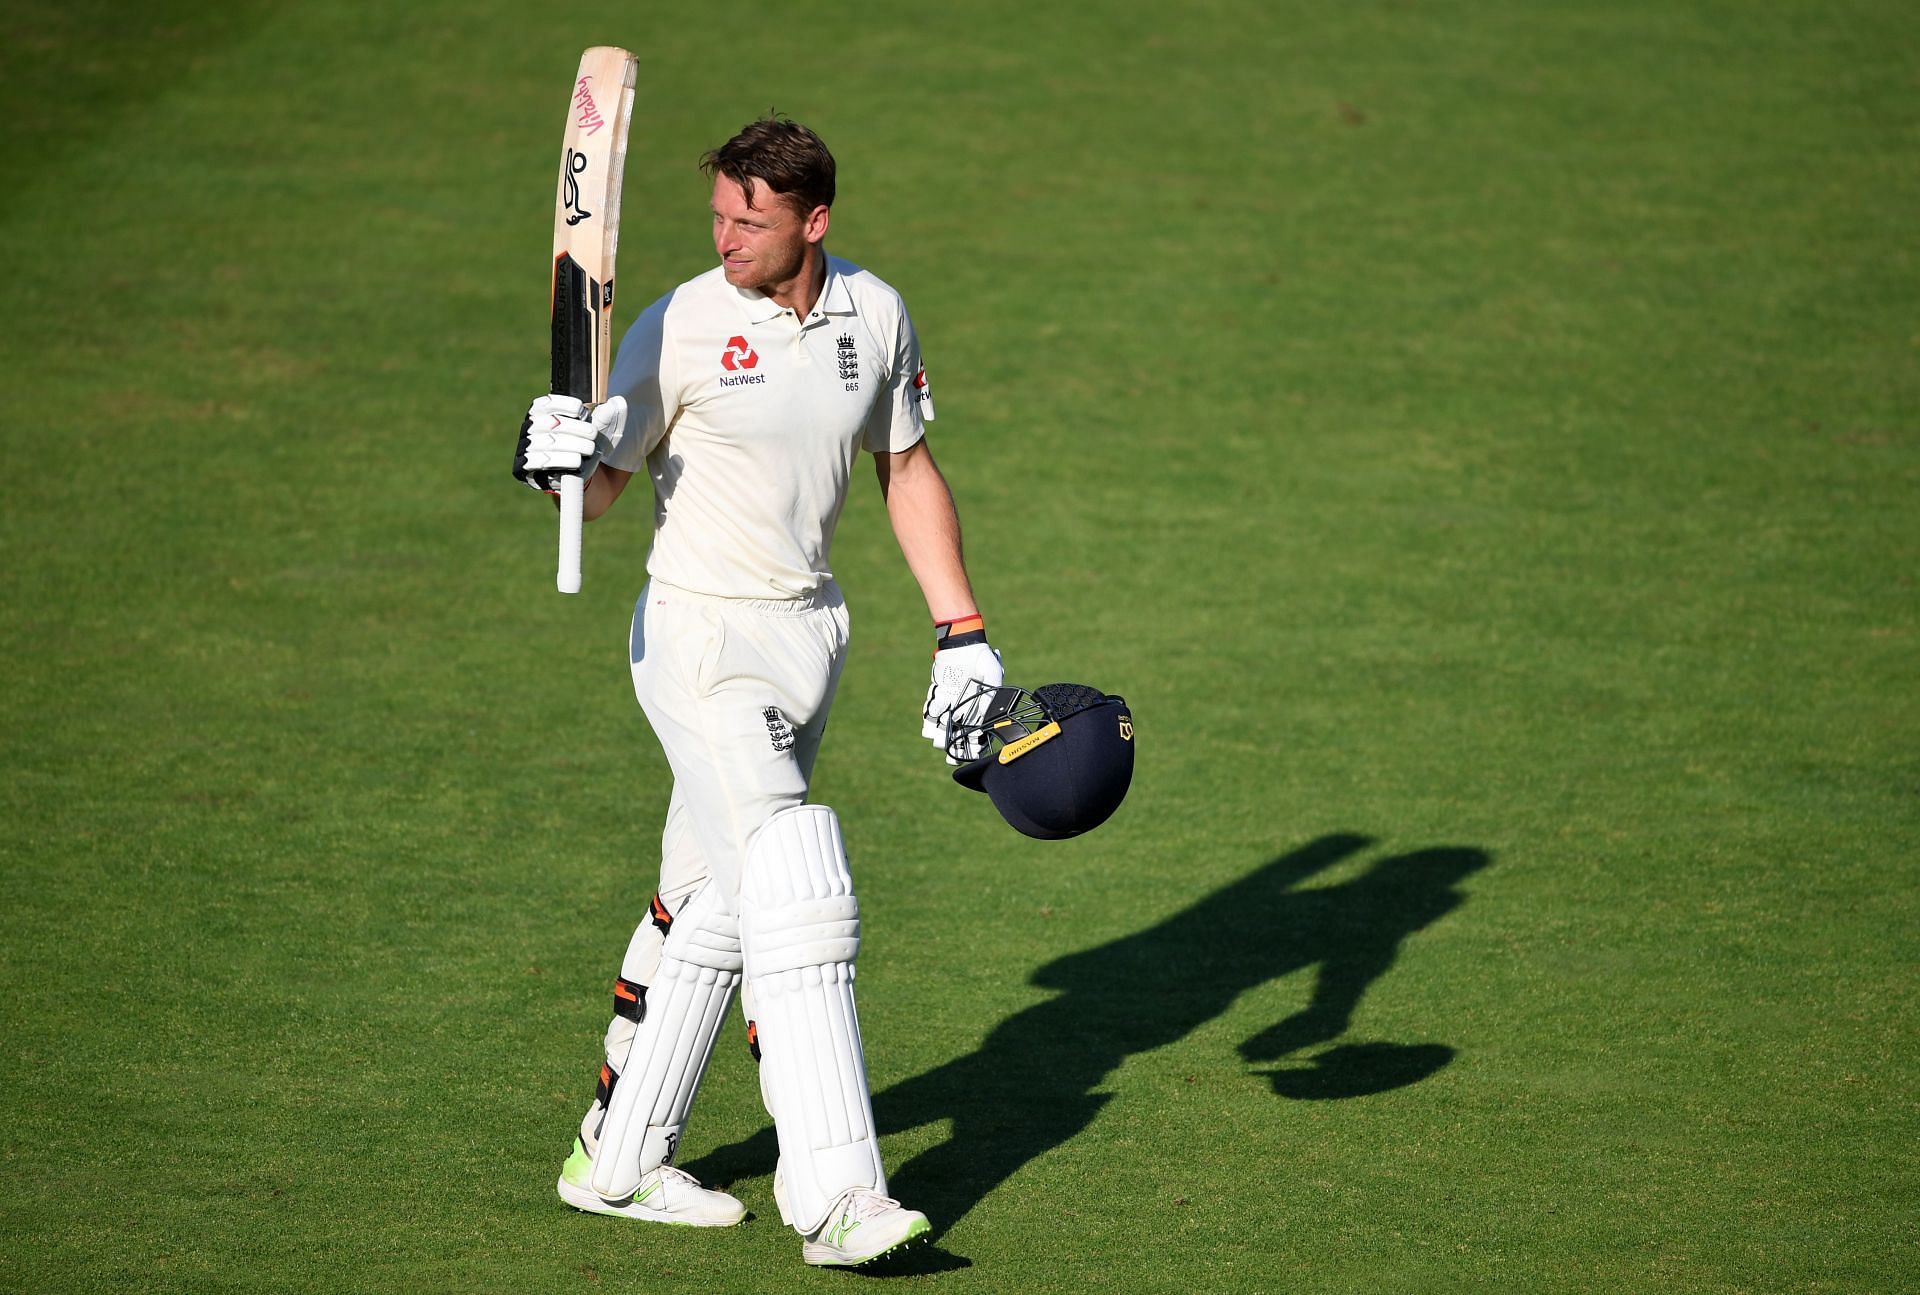 Buttler has hit 33 sixes in Tests so far